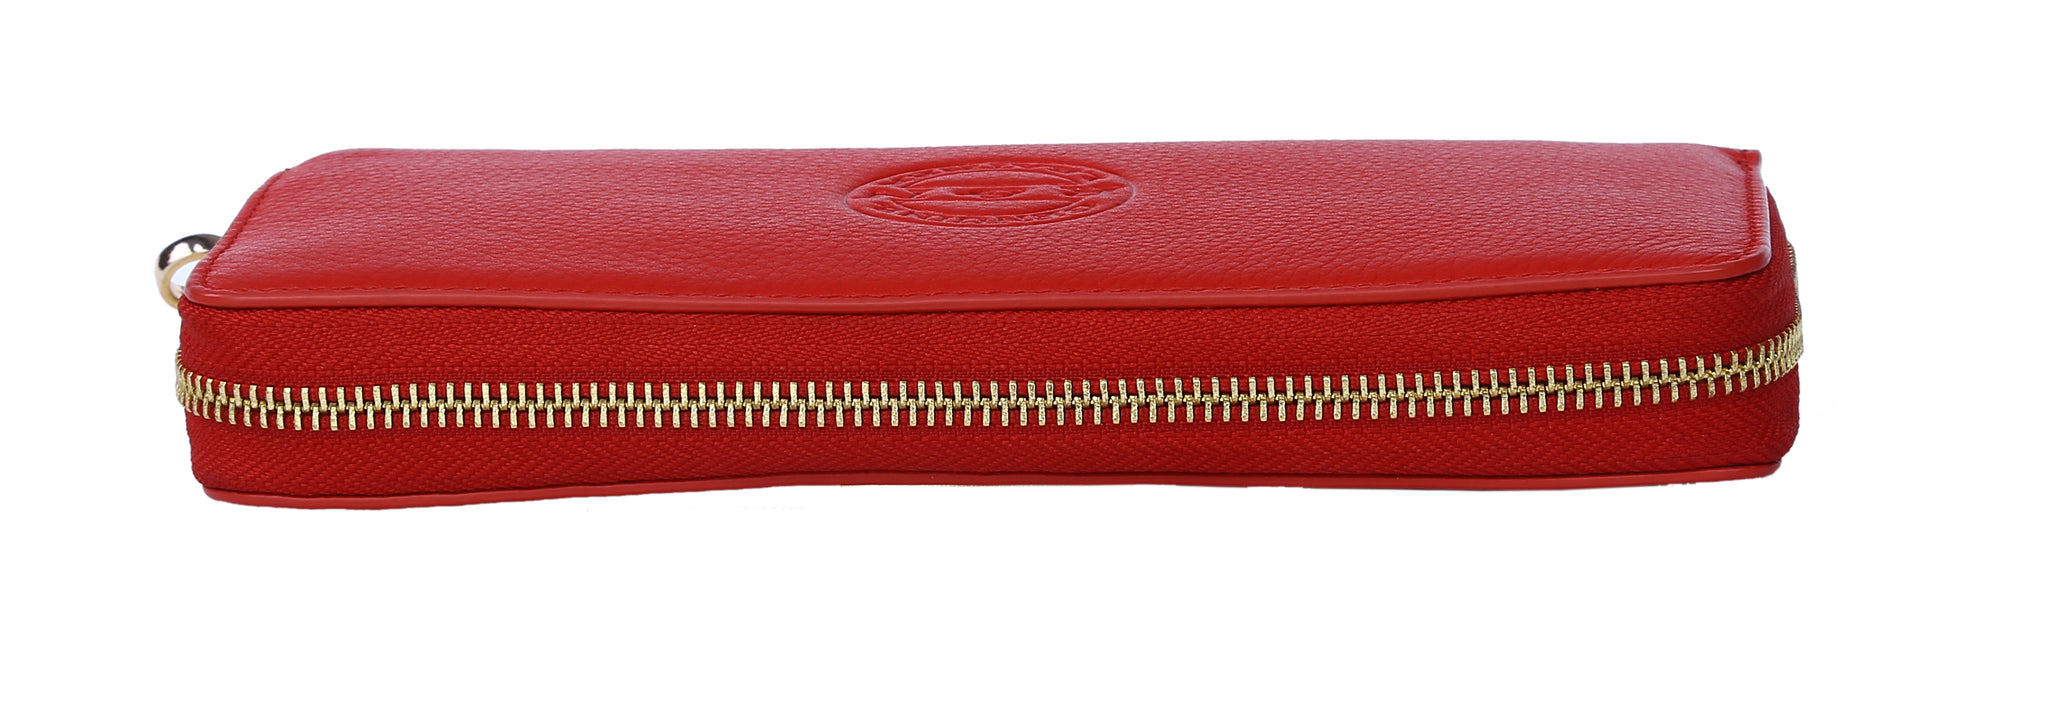 Spykar Men Red Leather Wallet - mawltas011red